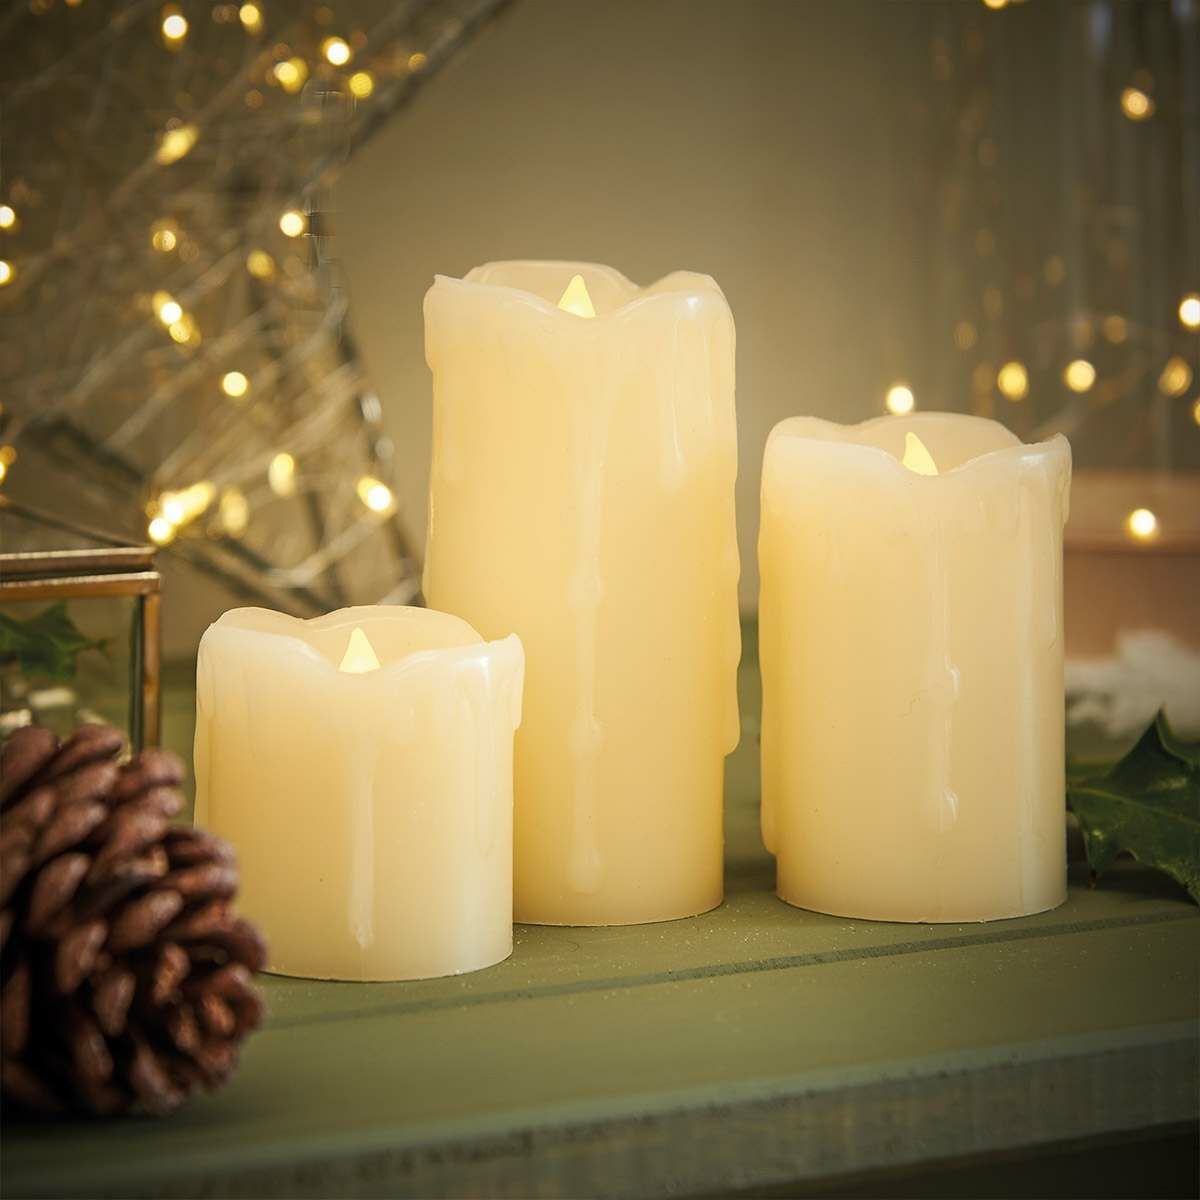 3 Battery Operated Flickering Wax Pillar LED Candles image 6